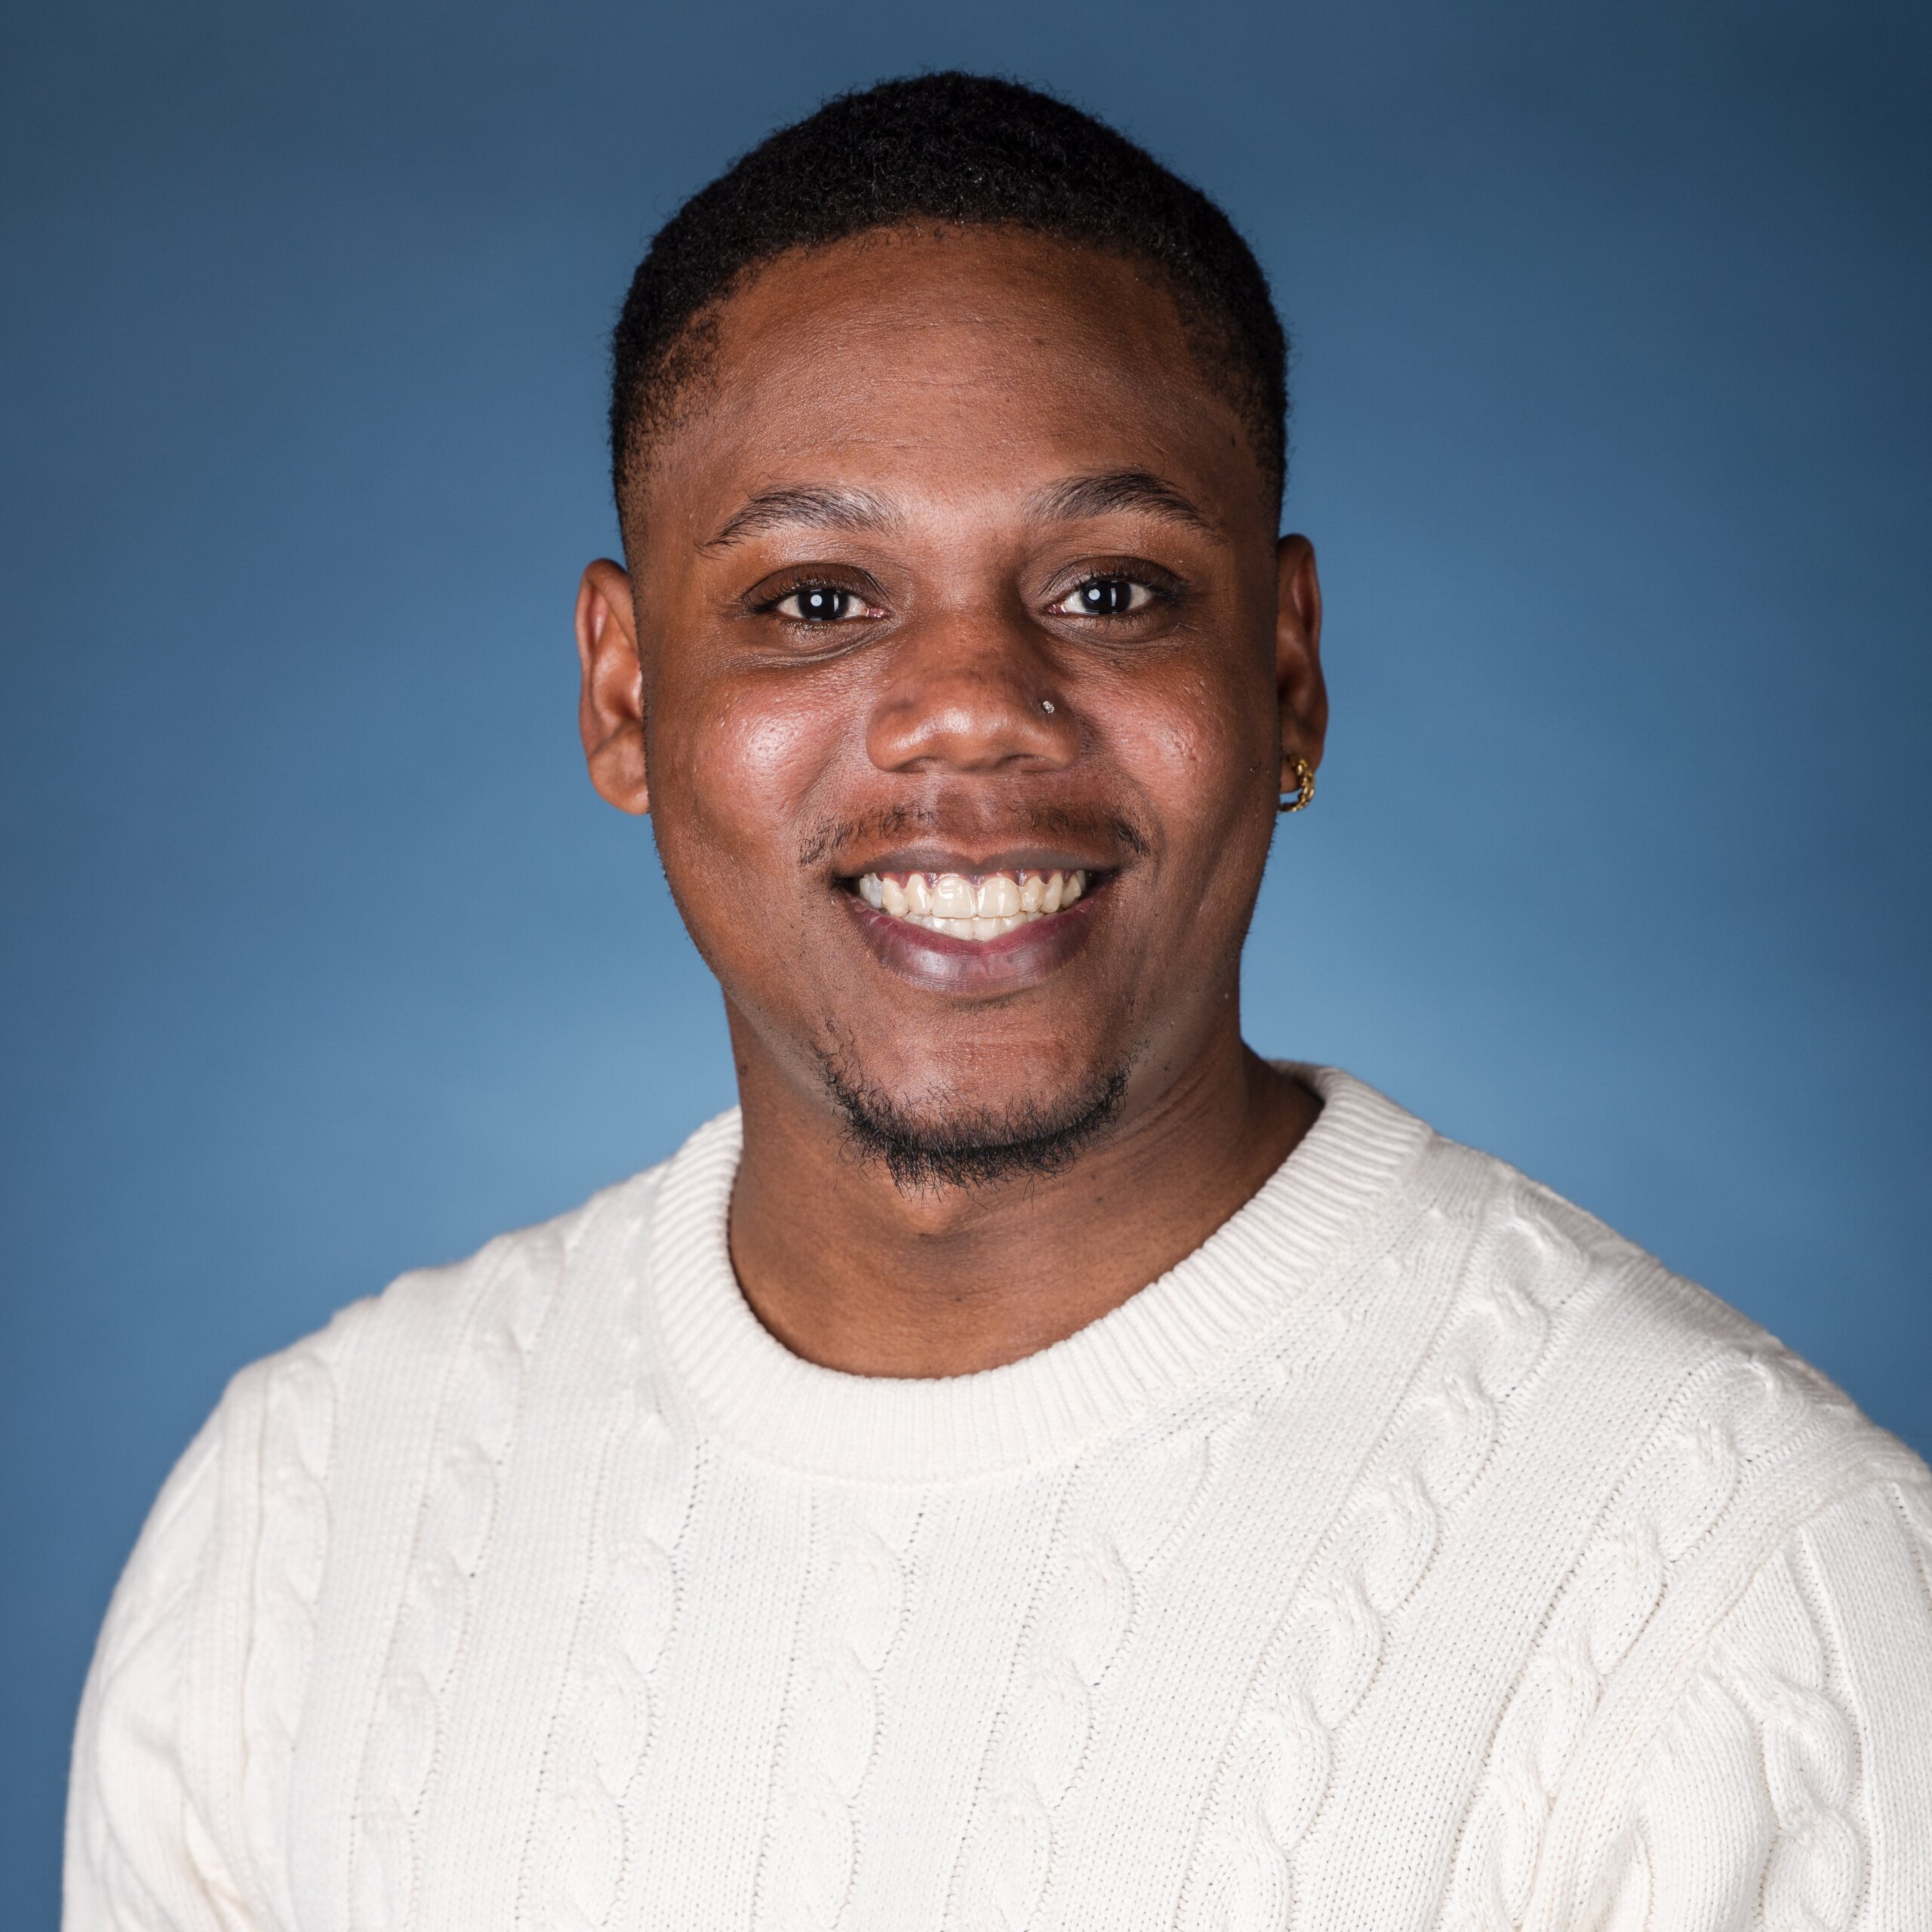 Jacquill Moss smiling headshot in front of a blue gradient backdrop